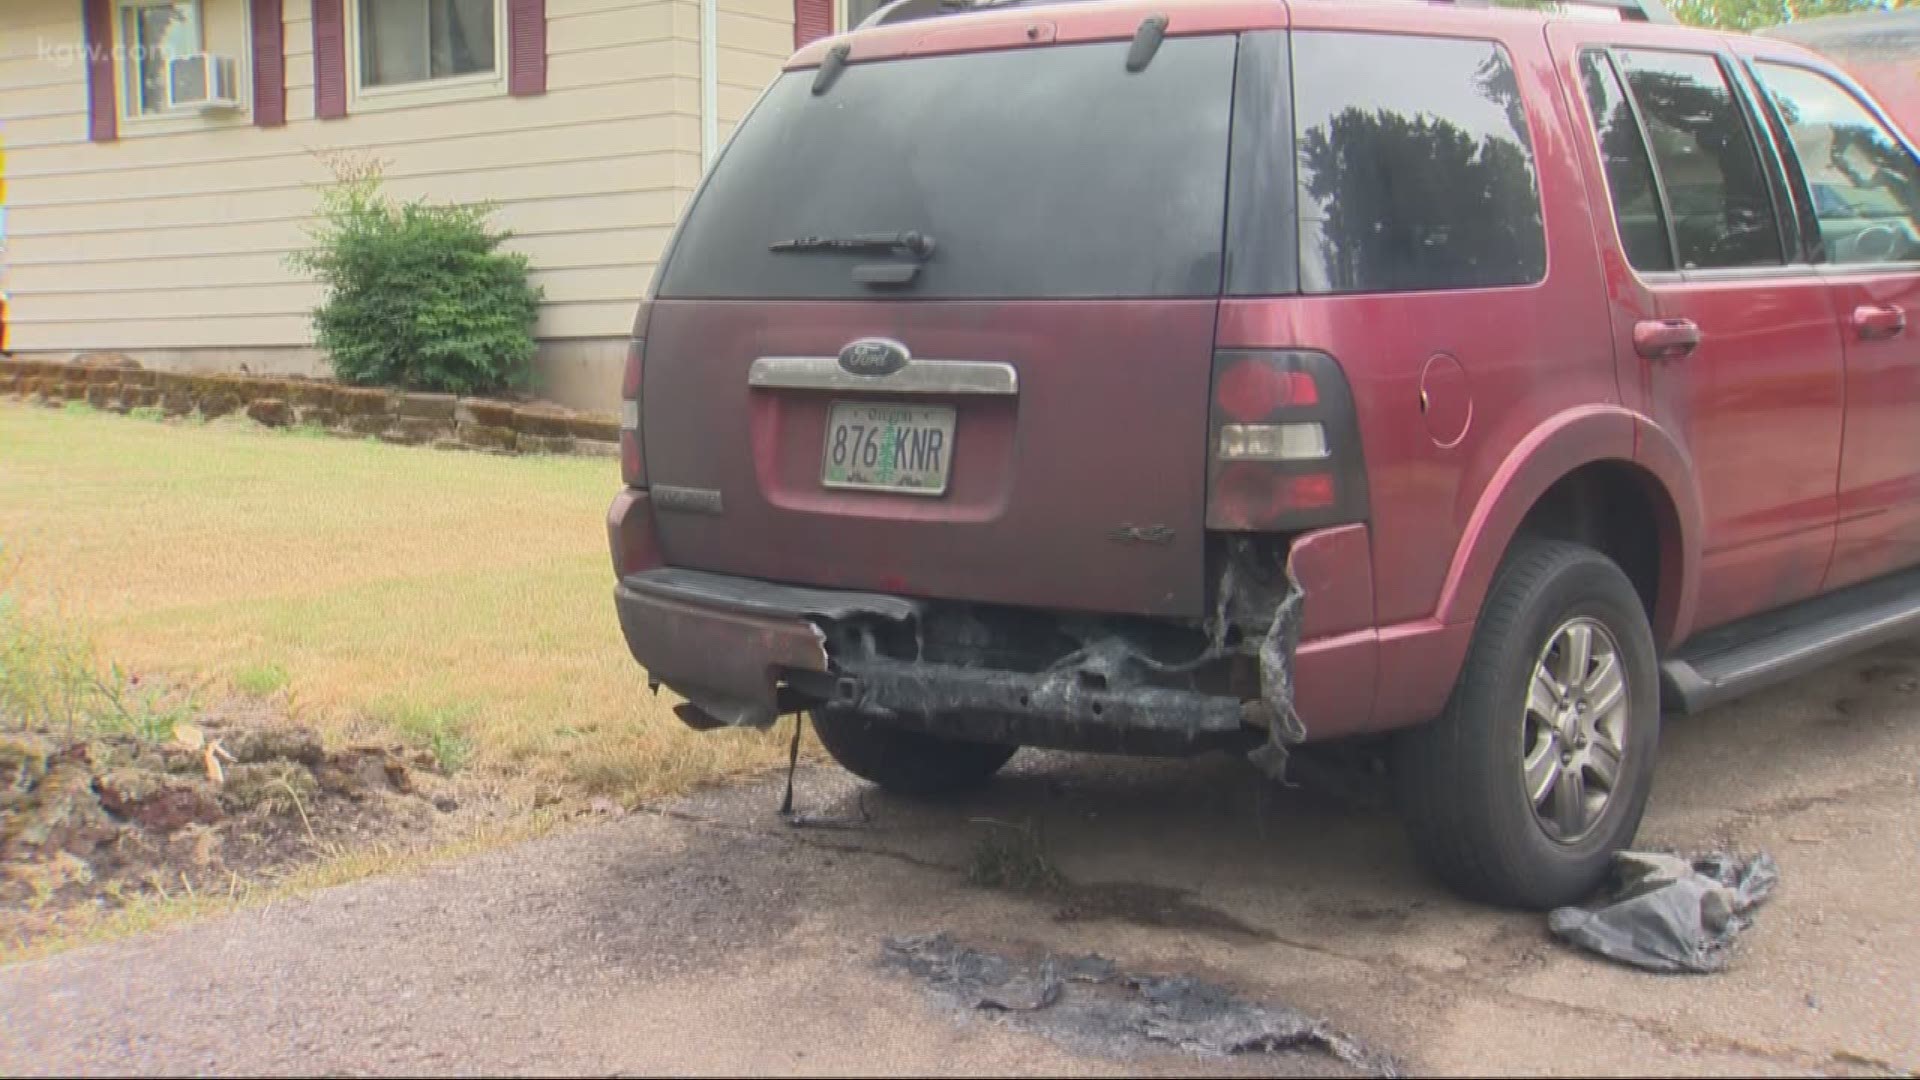 Police say a man’s SUV was set on fire hours after he got into a confrontation with several people who objected to his removal of items from a Salem roadside memorial honoring three teens.